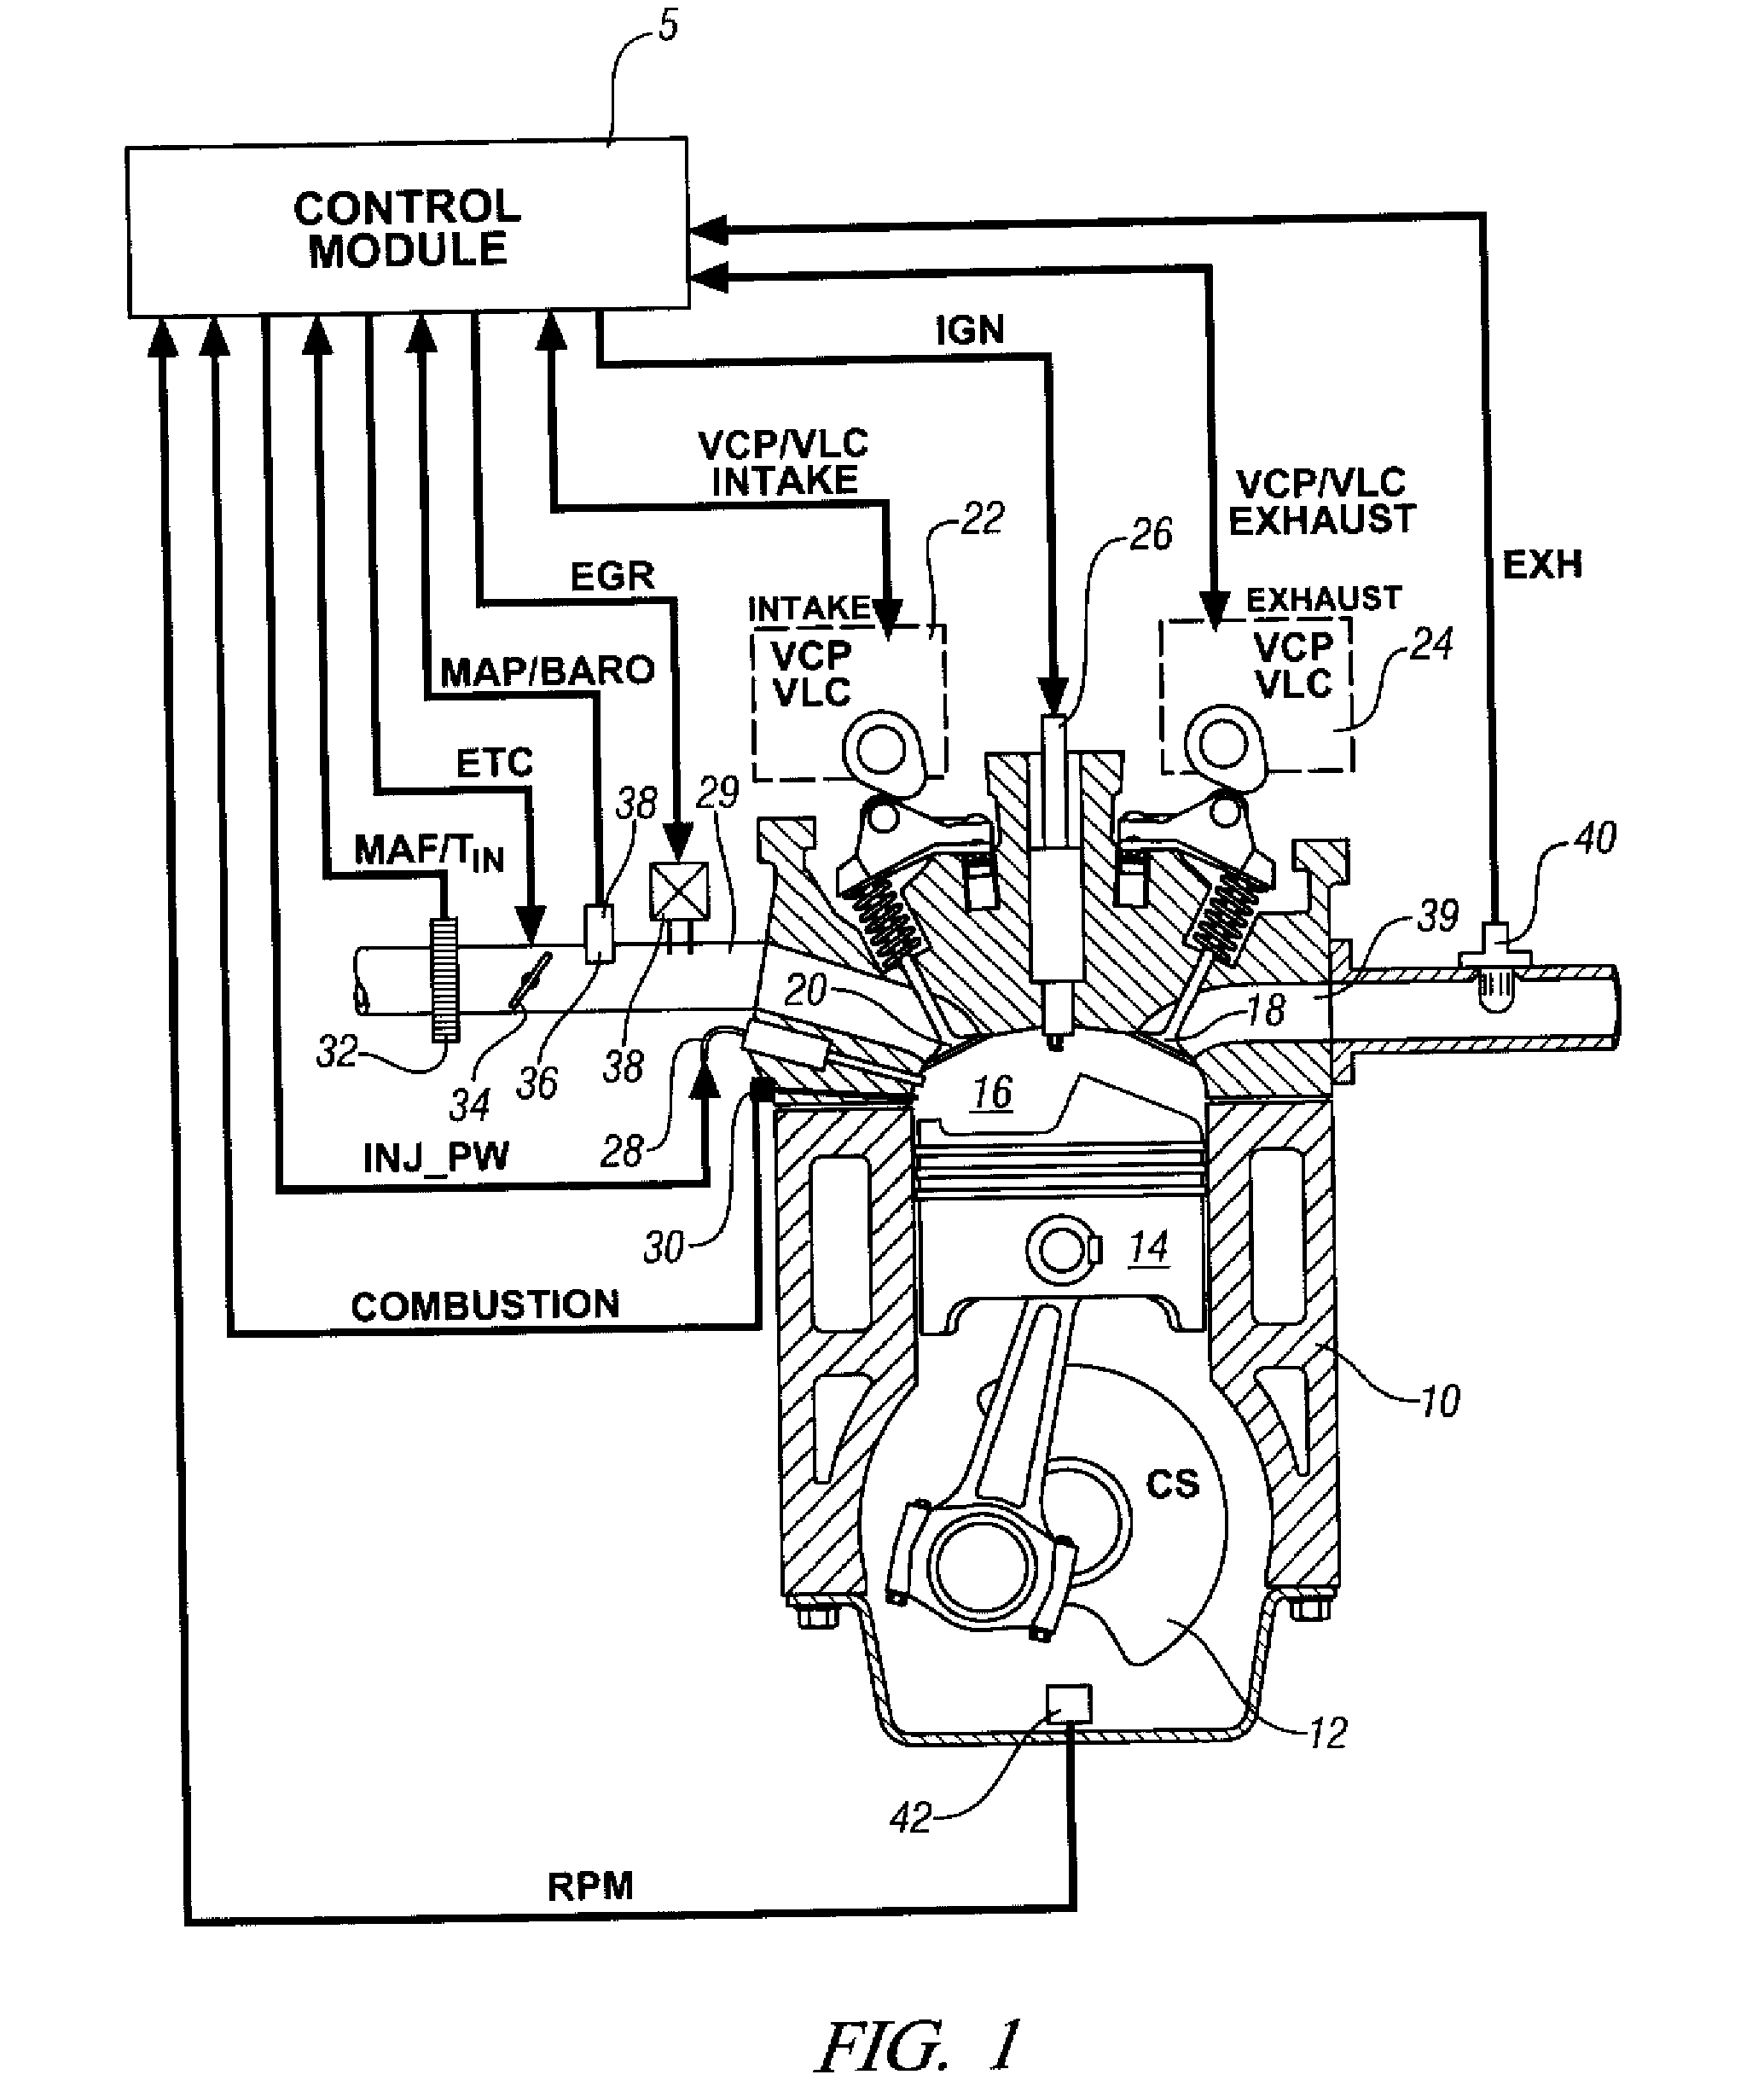 Method and apparatus for determining a combustion parameter for an internal combustion engine